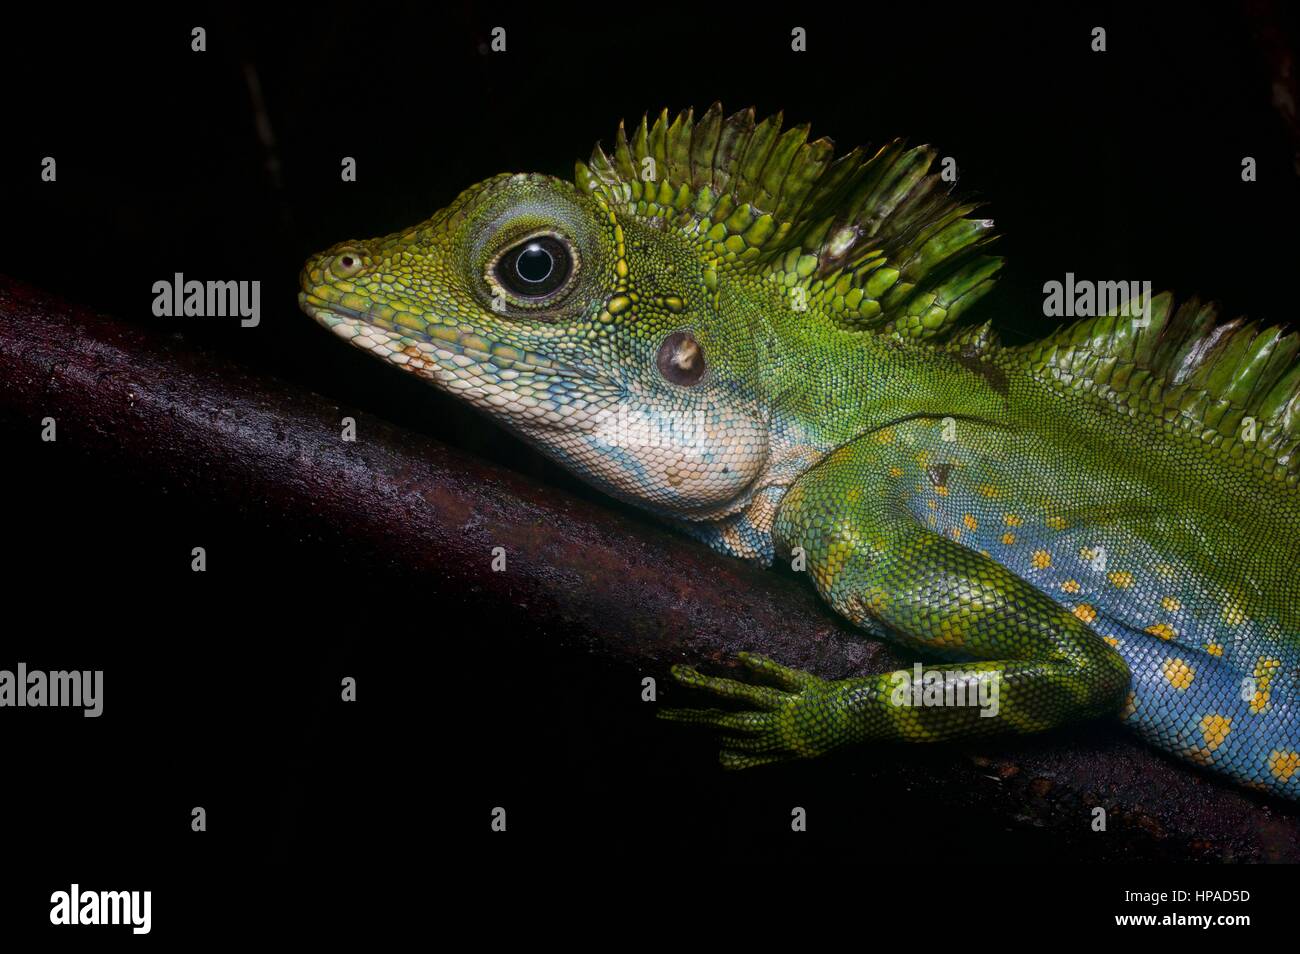 An adult male Great Anglehead Lizard (Gonocephalus grandis) resting in the Malaysian rainforest at night Stock Photo